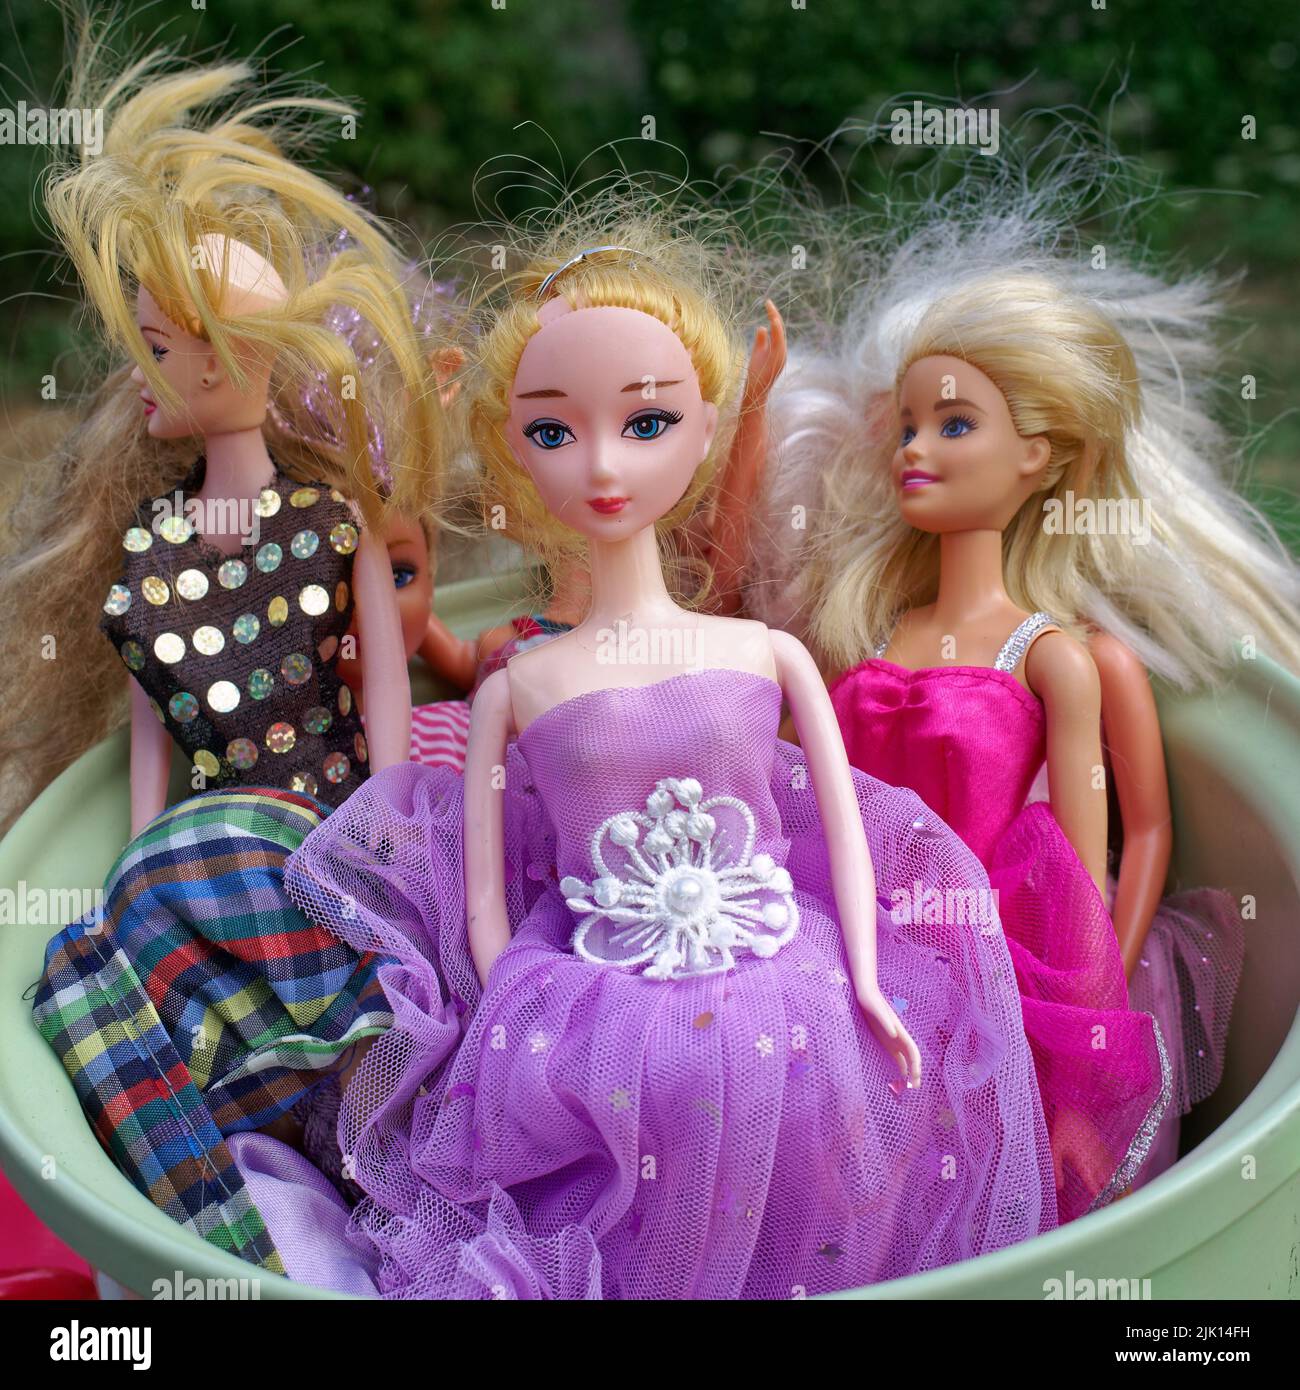 Cute dolls with tousled hairstyles Stock Photo